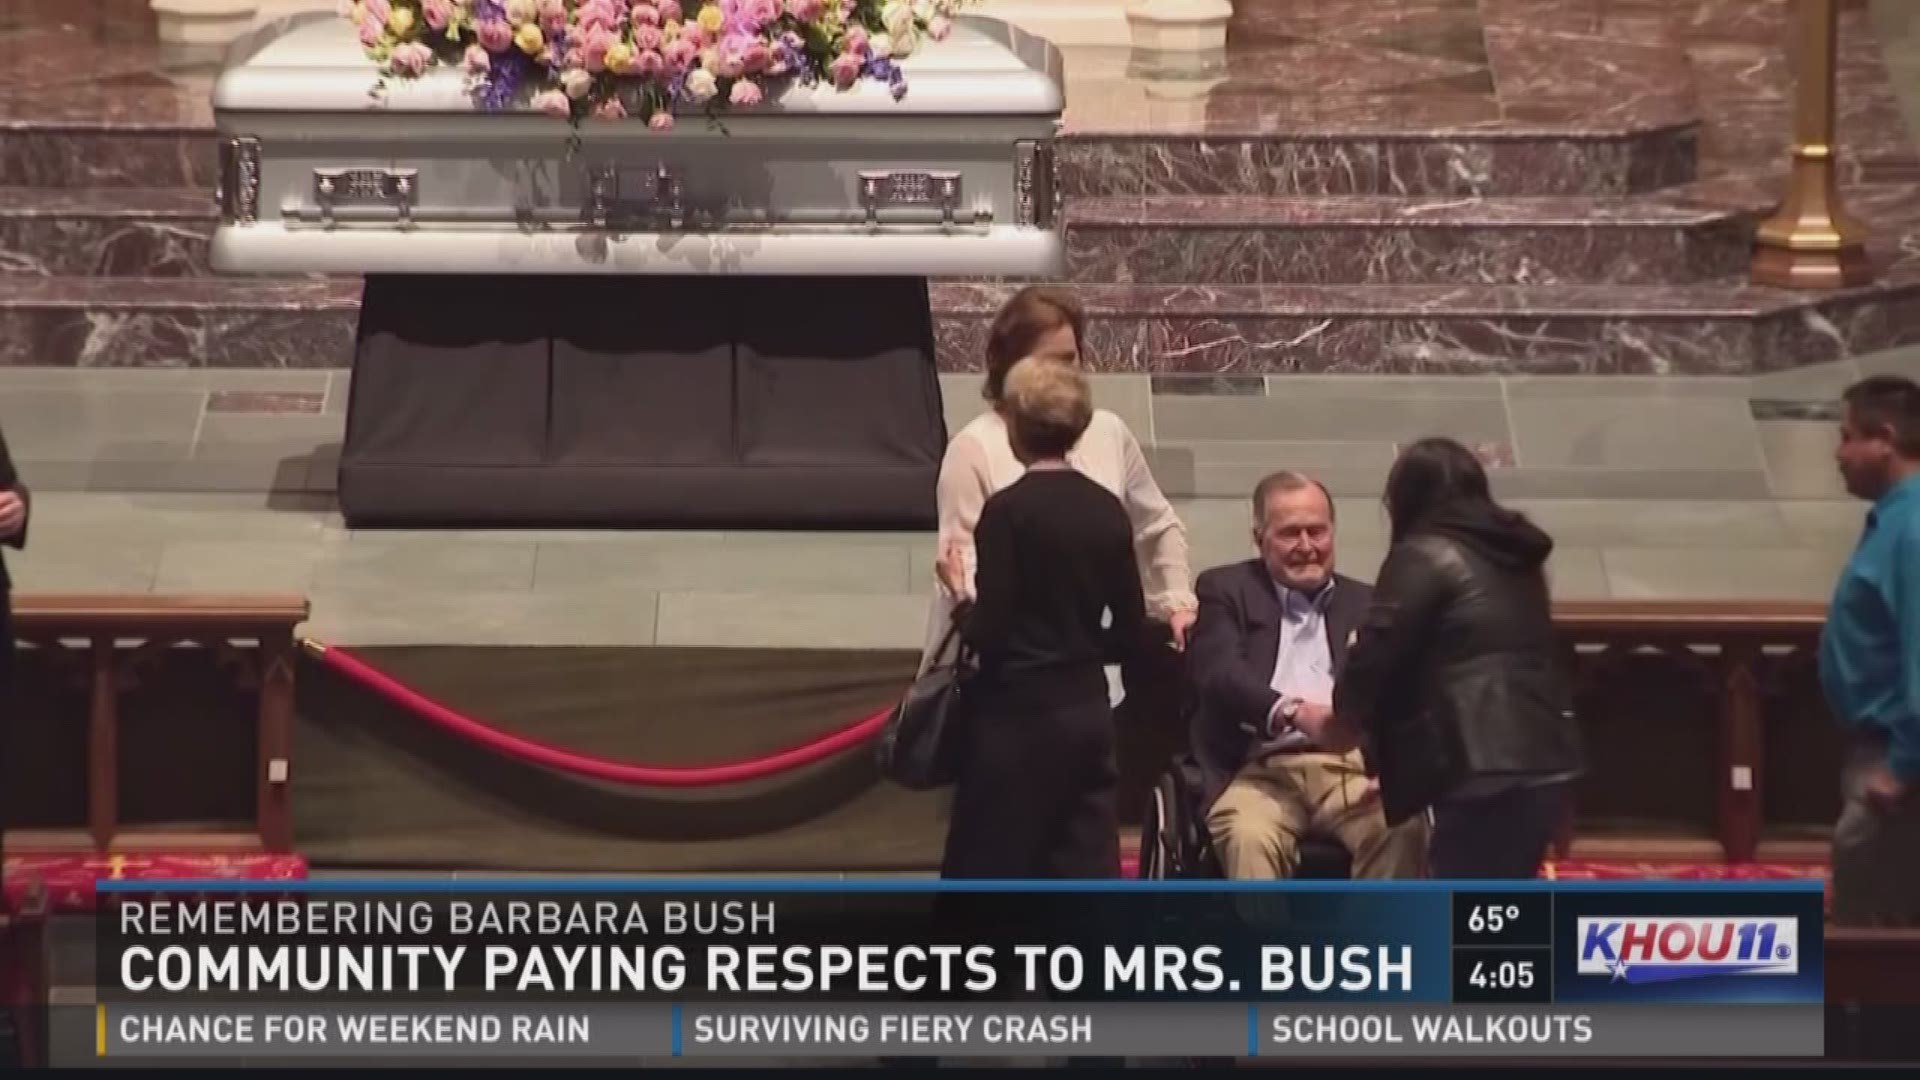 Those on board some of the first buses to St. Martin's Episcopal Church for Barbara Bush's visitation met President George H.W. Bush.